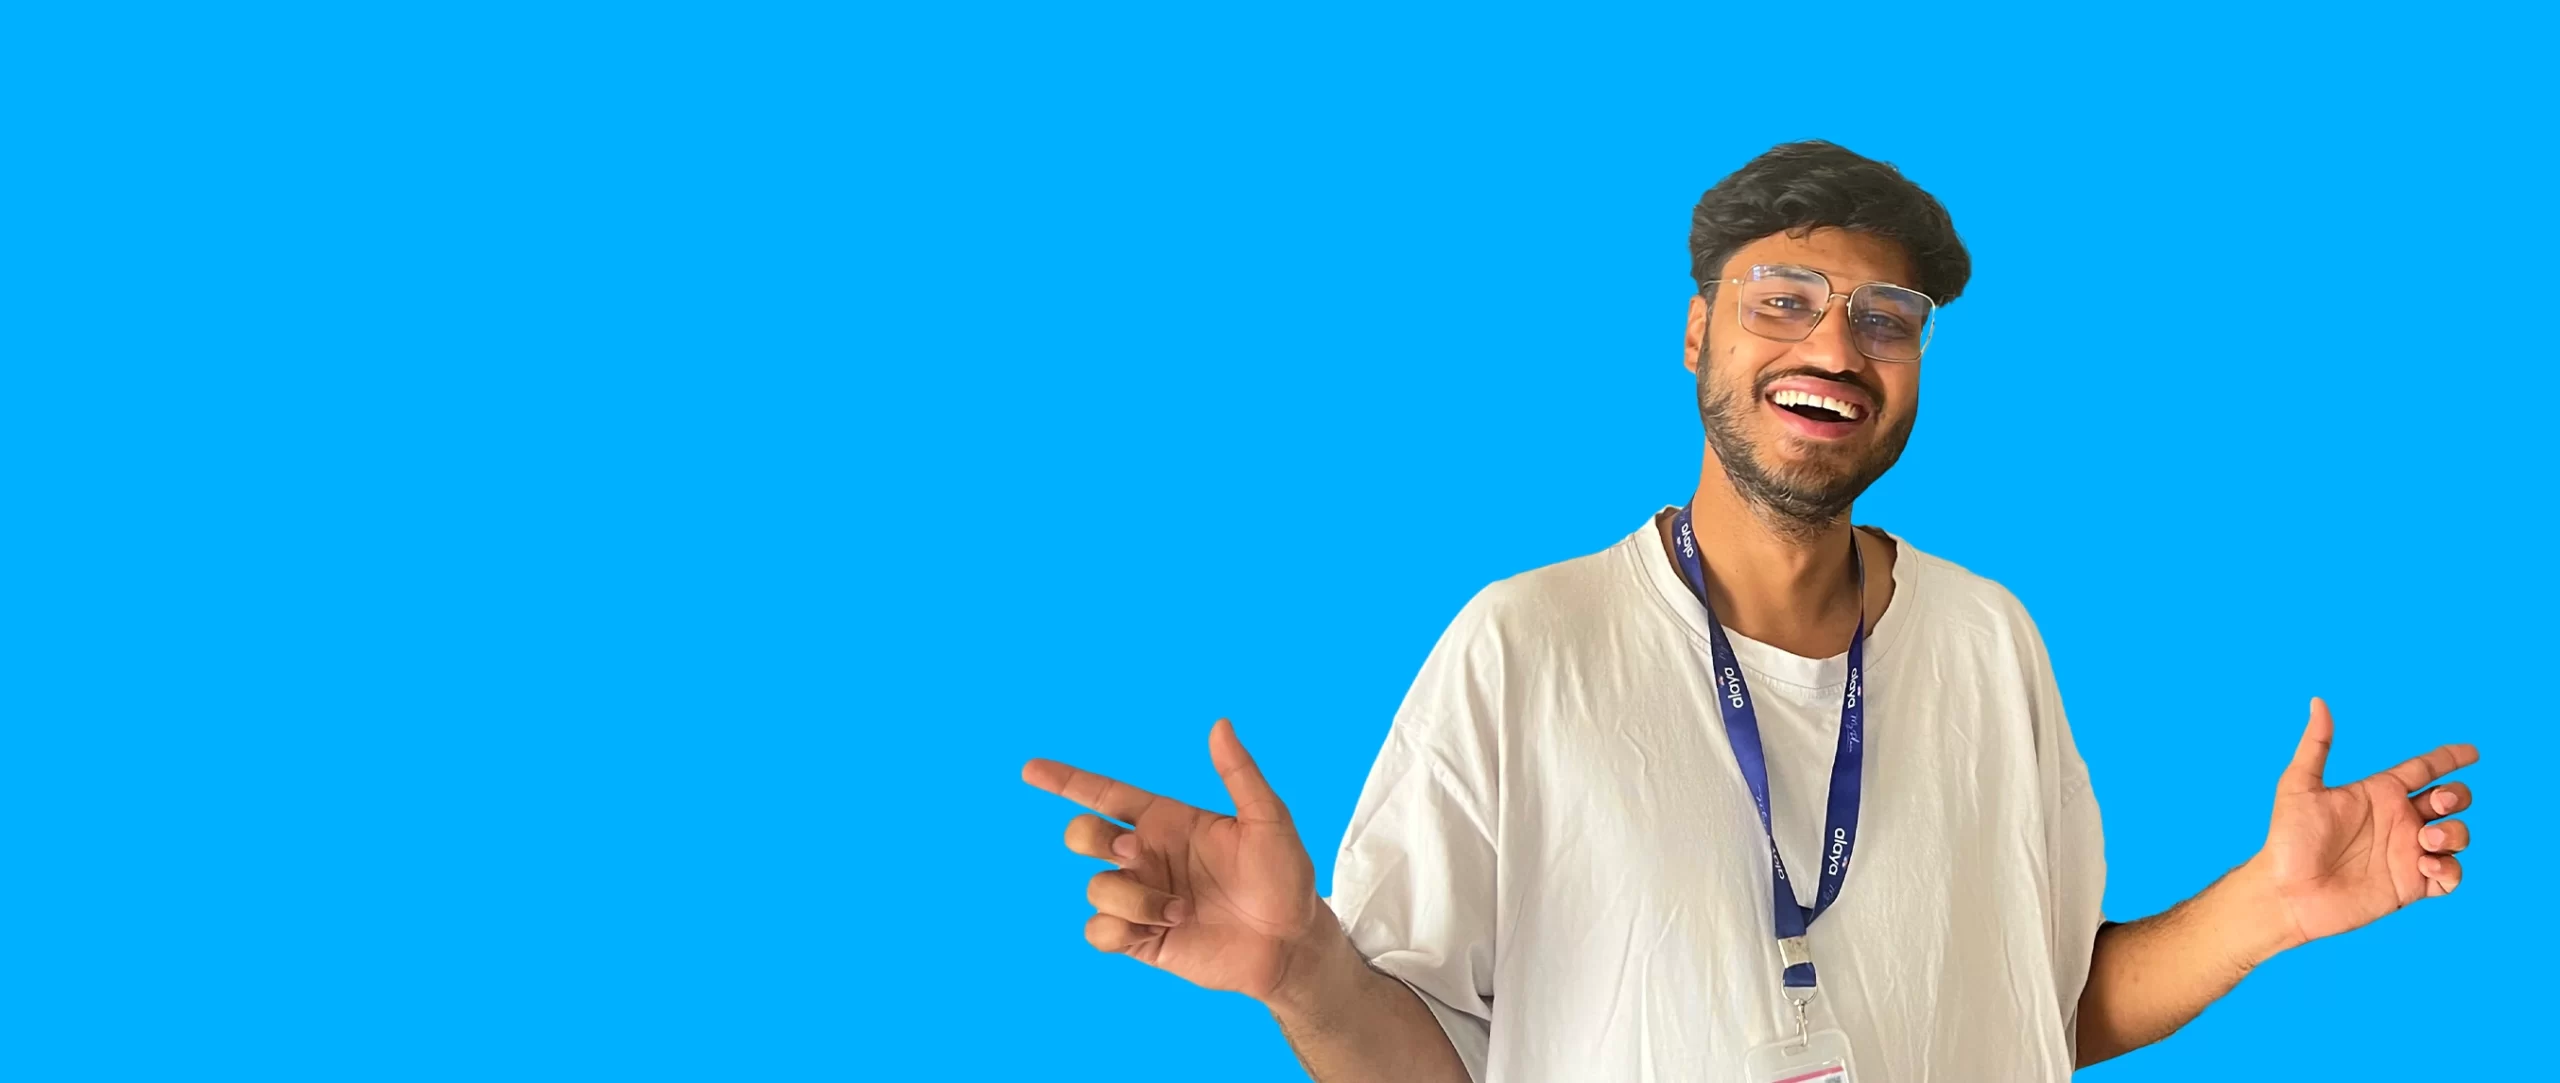 A man with glasses and a white shirt, smiling widely, poses against a vivid blue background